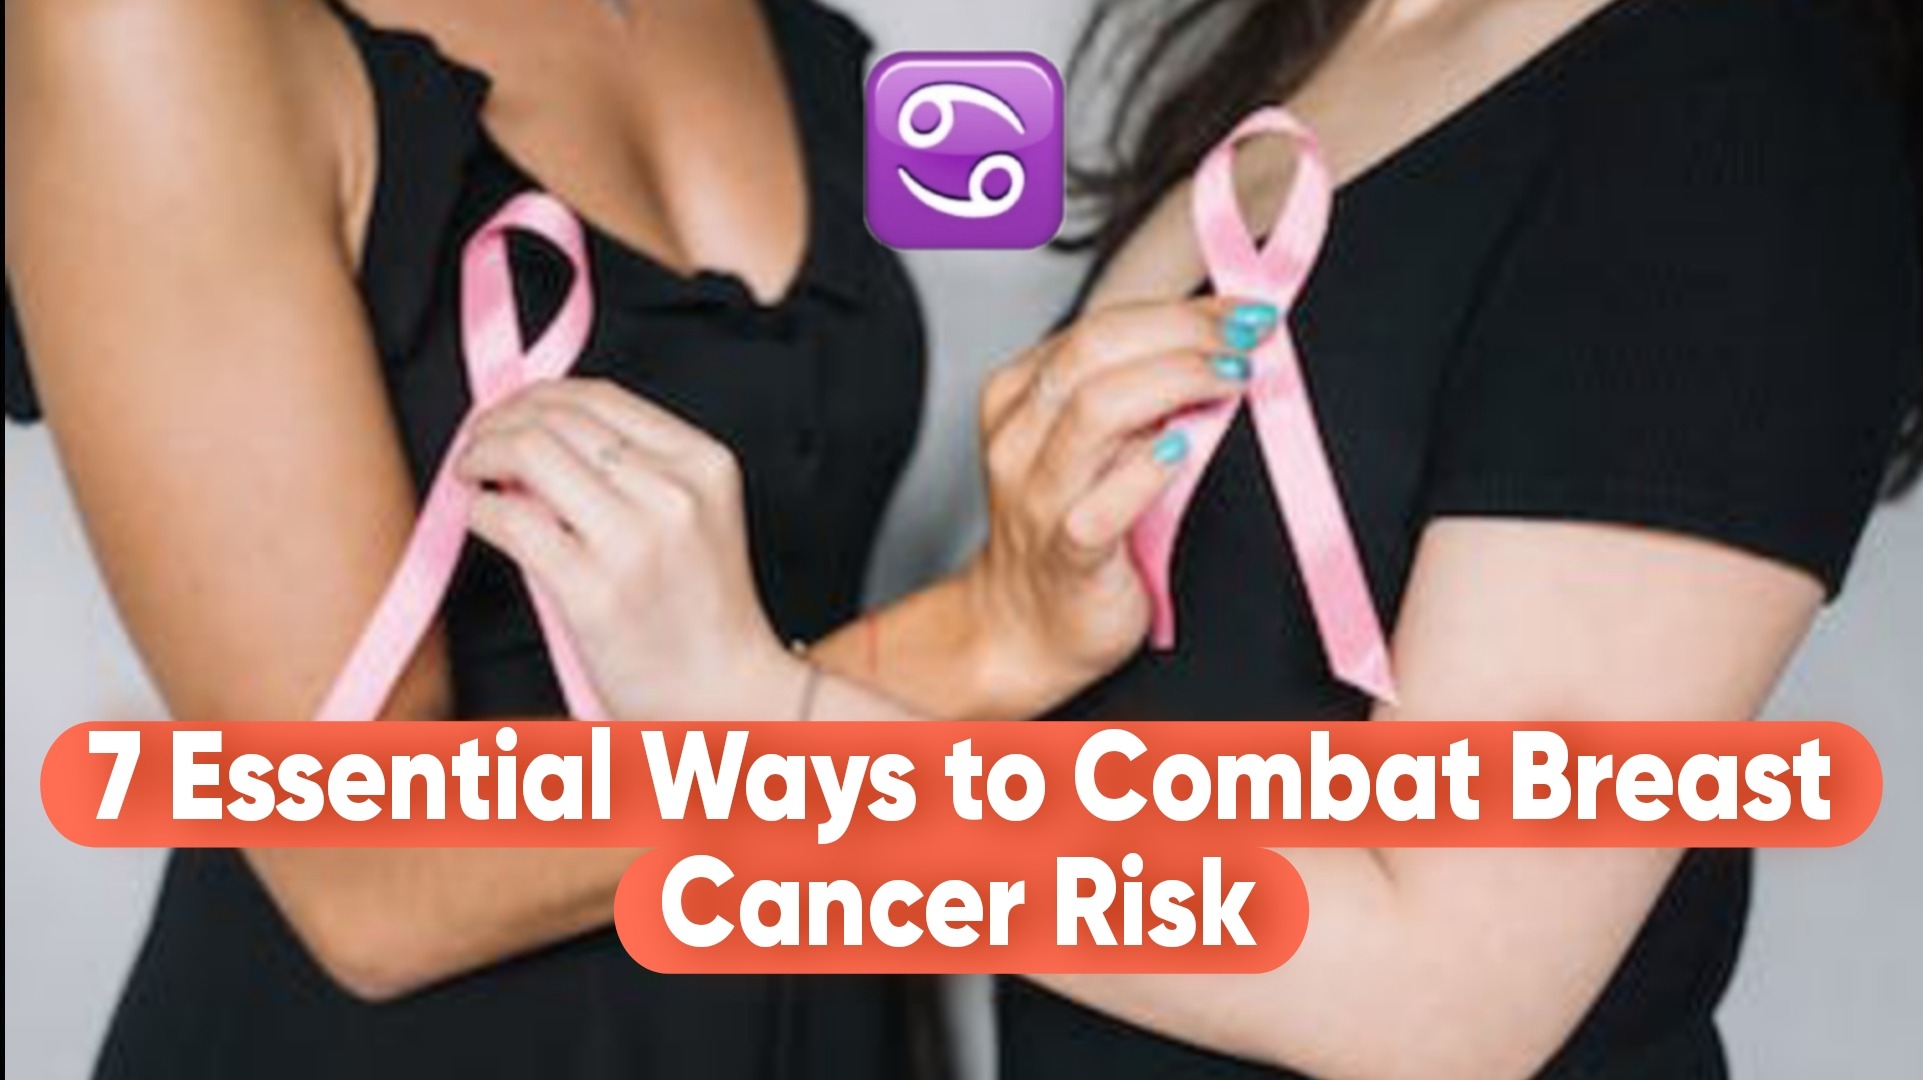 Empower Yourself: 7 Essential Ways to Combat Breast Cancer Risk